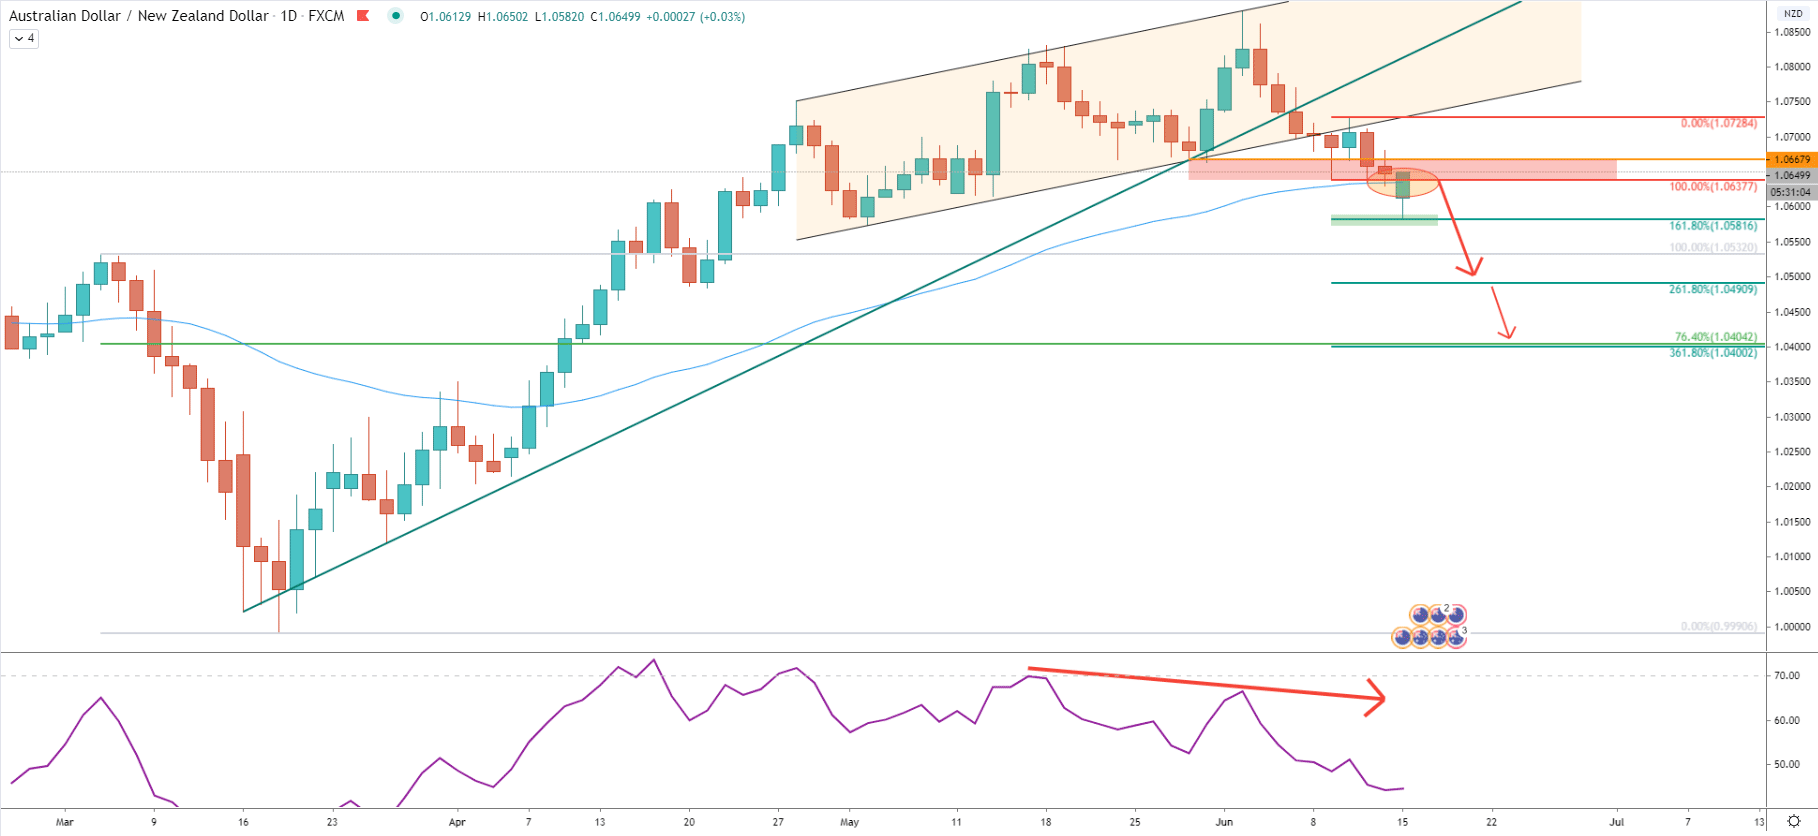 AUD/NZD Daily Technical Analysis 15 June 2020